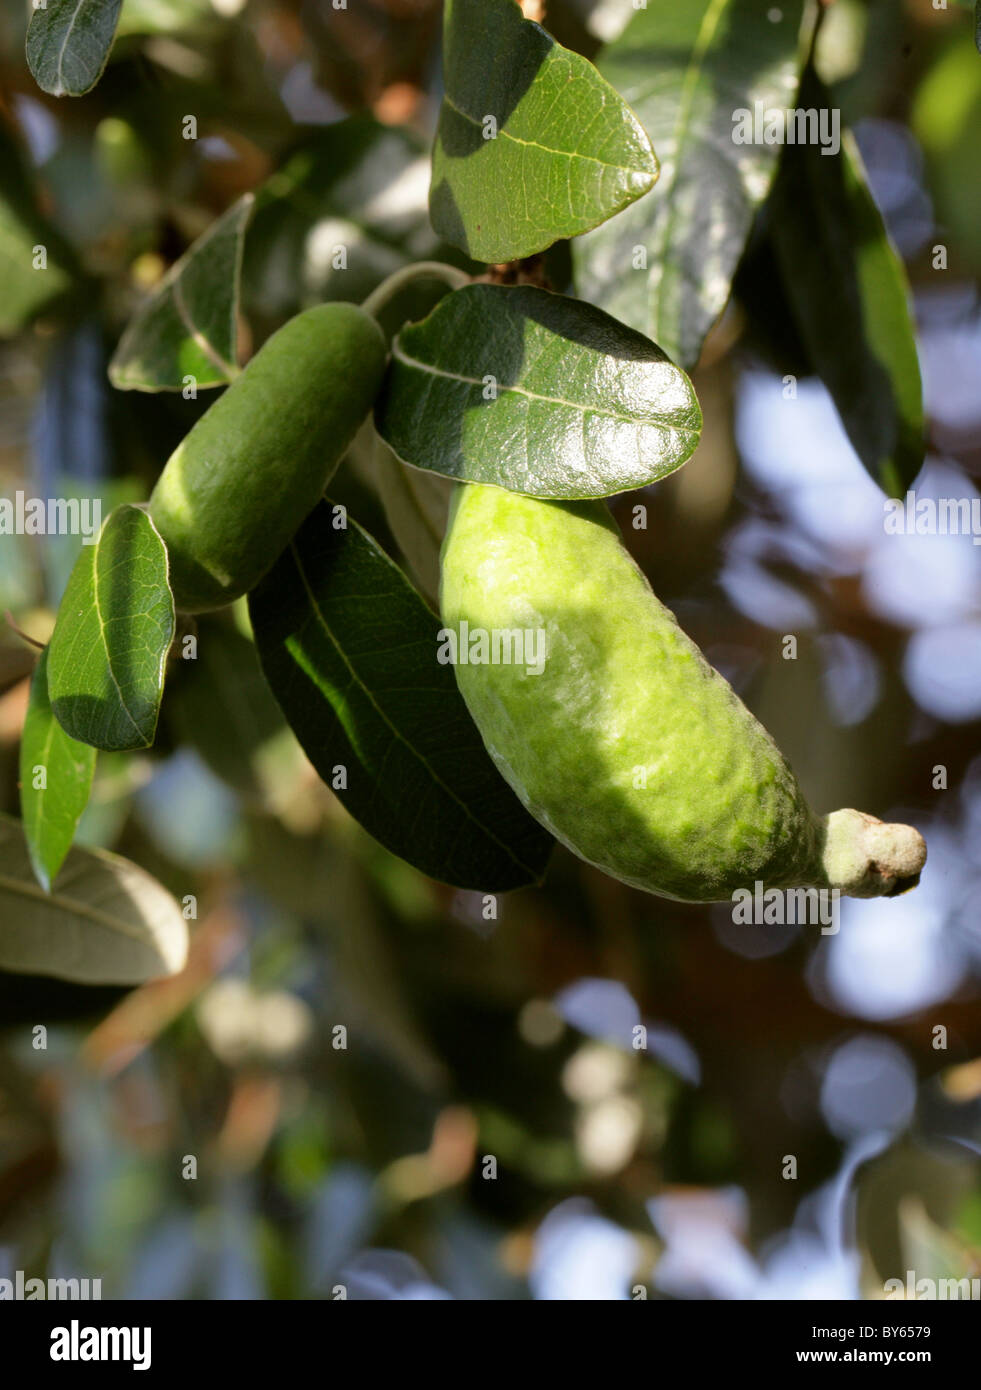 Pineapple Guava or Guavasteen, Acca sellowiana syn Feijoa sellowiana, Myrtaceae. Unripe Fruit. Stock Photo